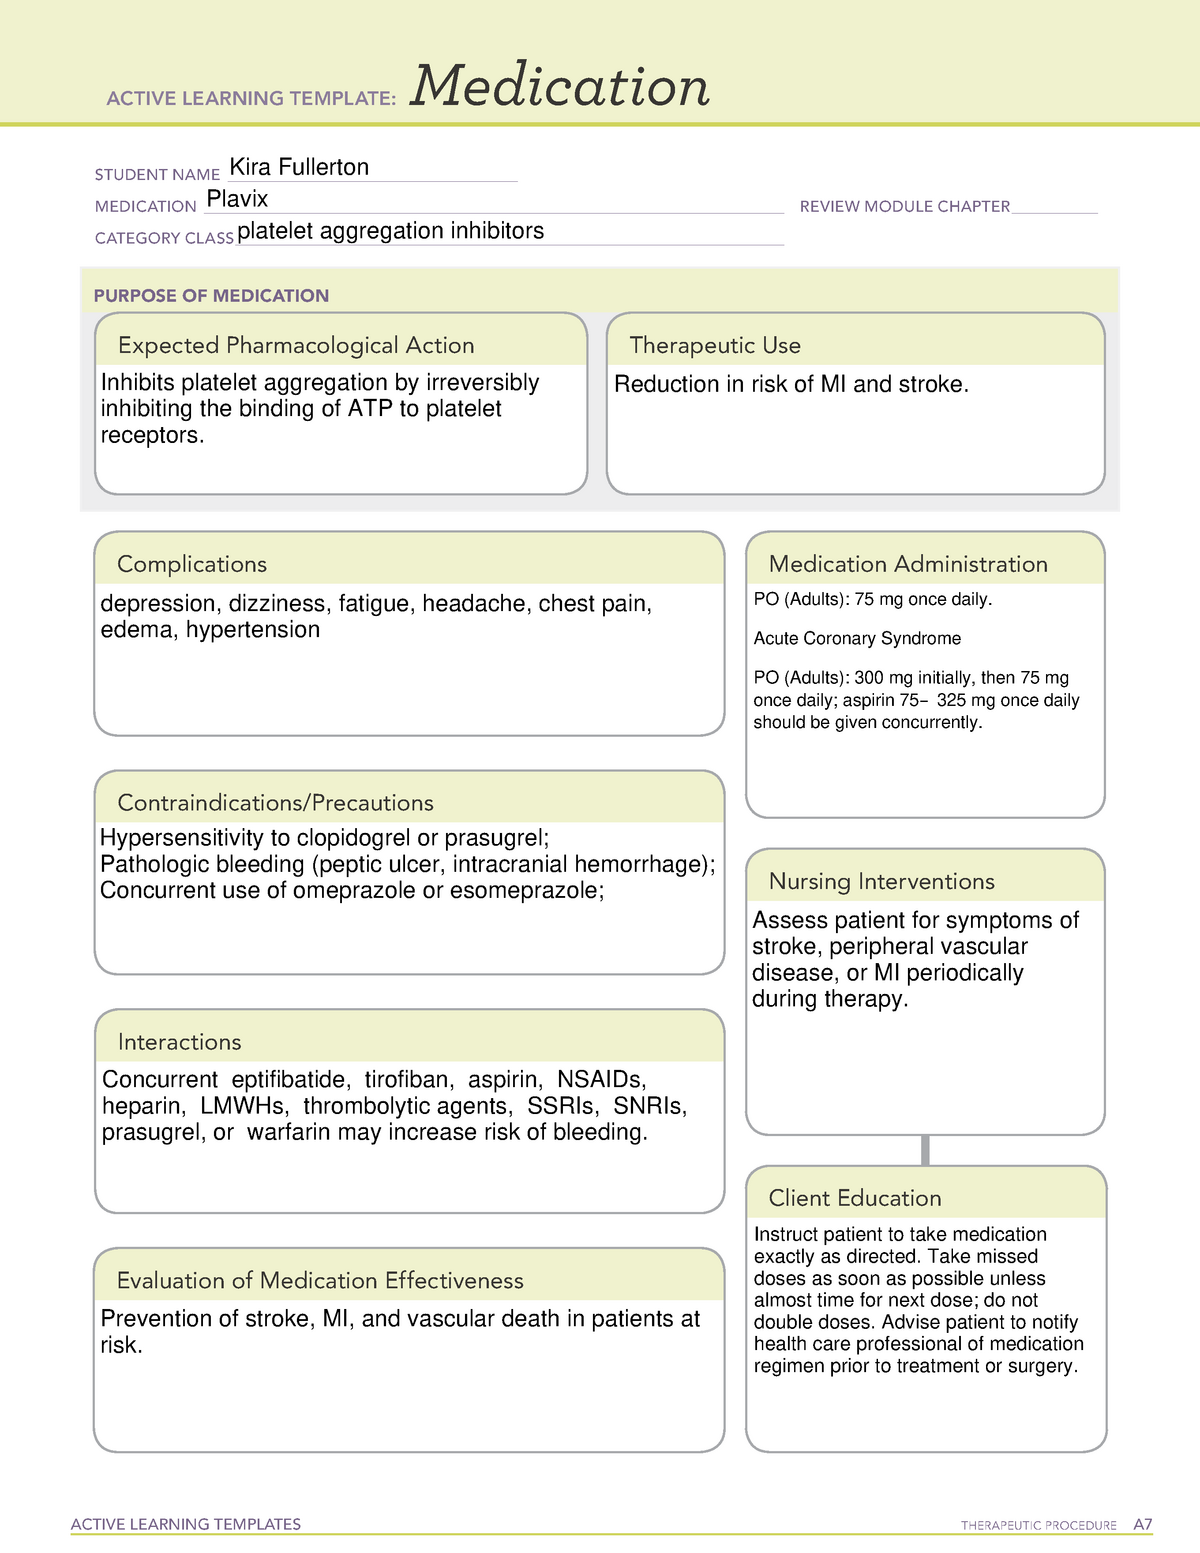 MED Plavix ACTIVE LEARNING TEMPLATES THERAPEUTIC PROCEDURE A